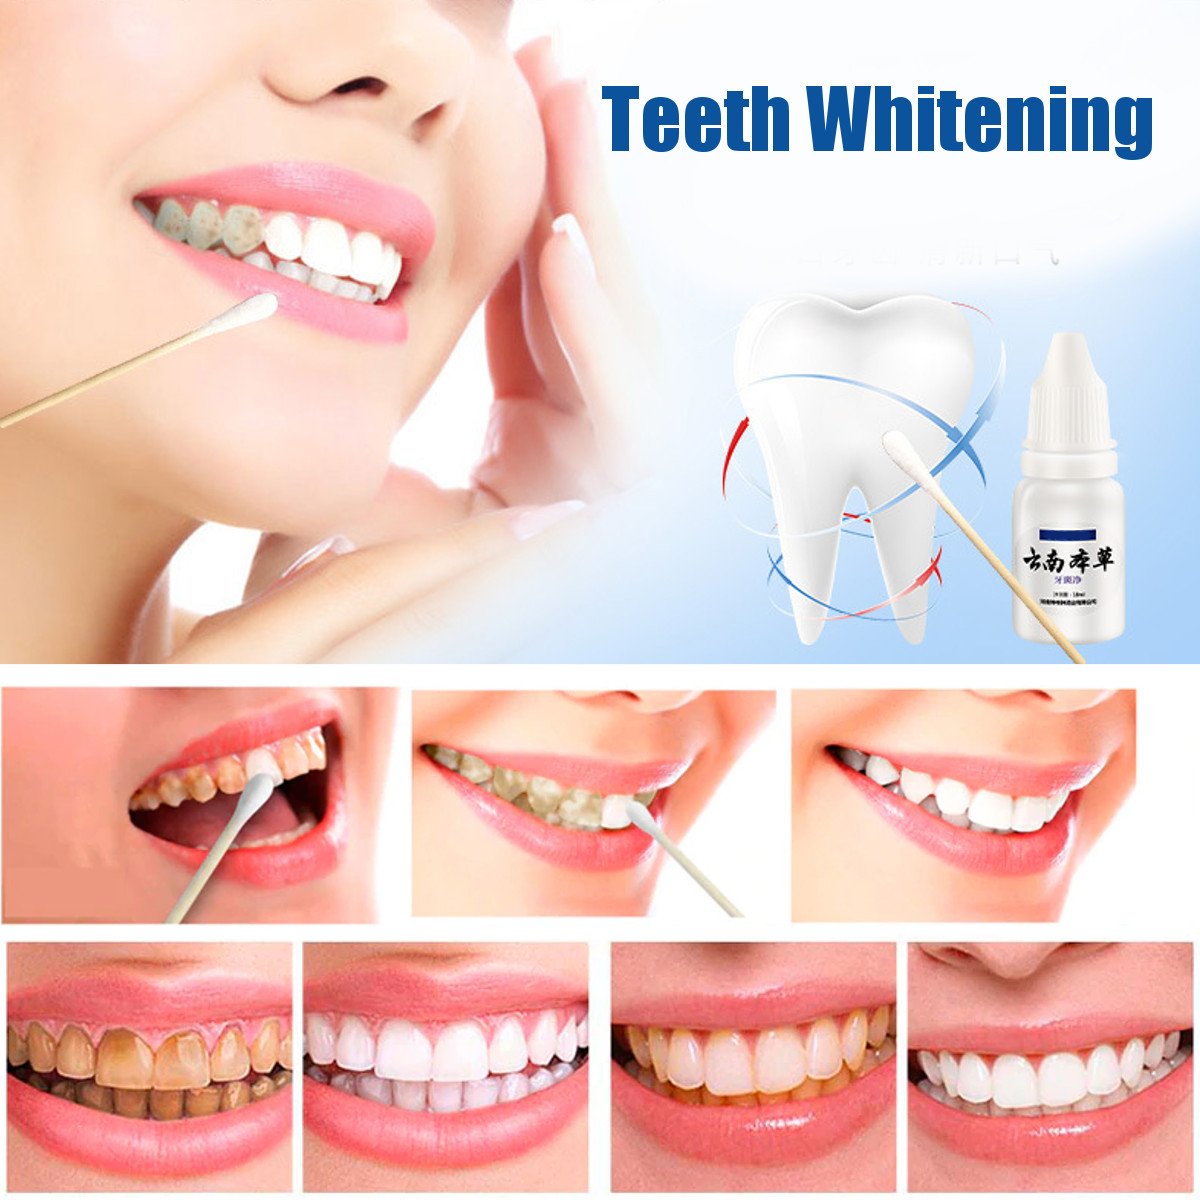 Herb-Teeth-Whitening-Cleansing-Serum-Essence-Oral-Hygiene-Effectively-Removes-Tartars-Plaque-Stains--1815887-4